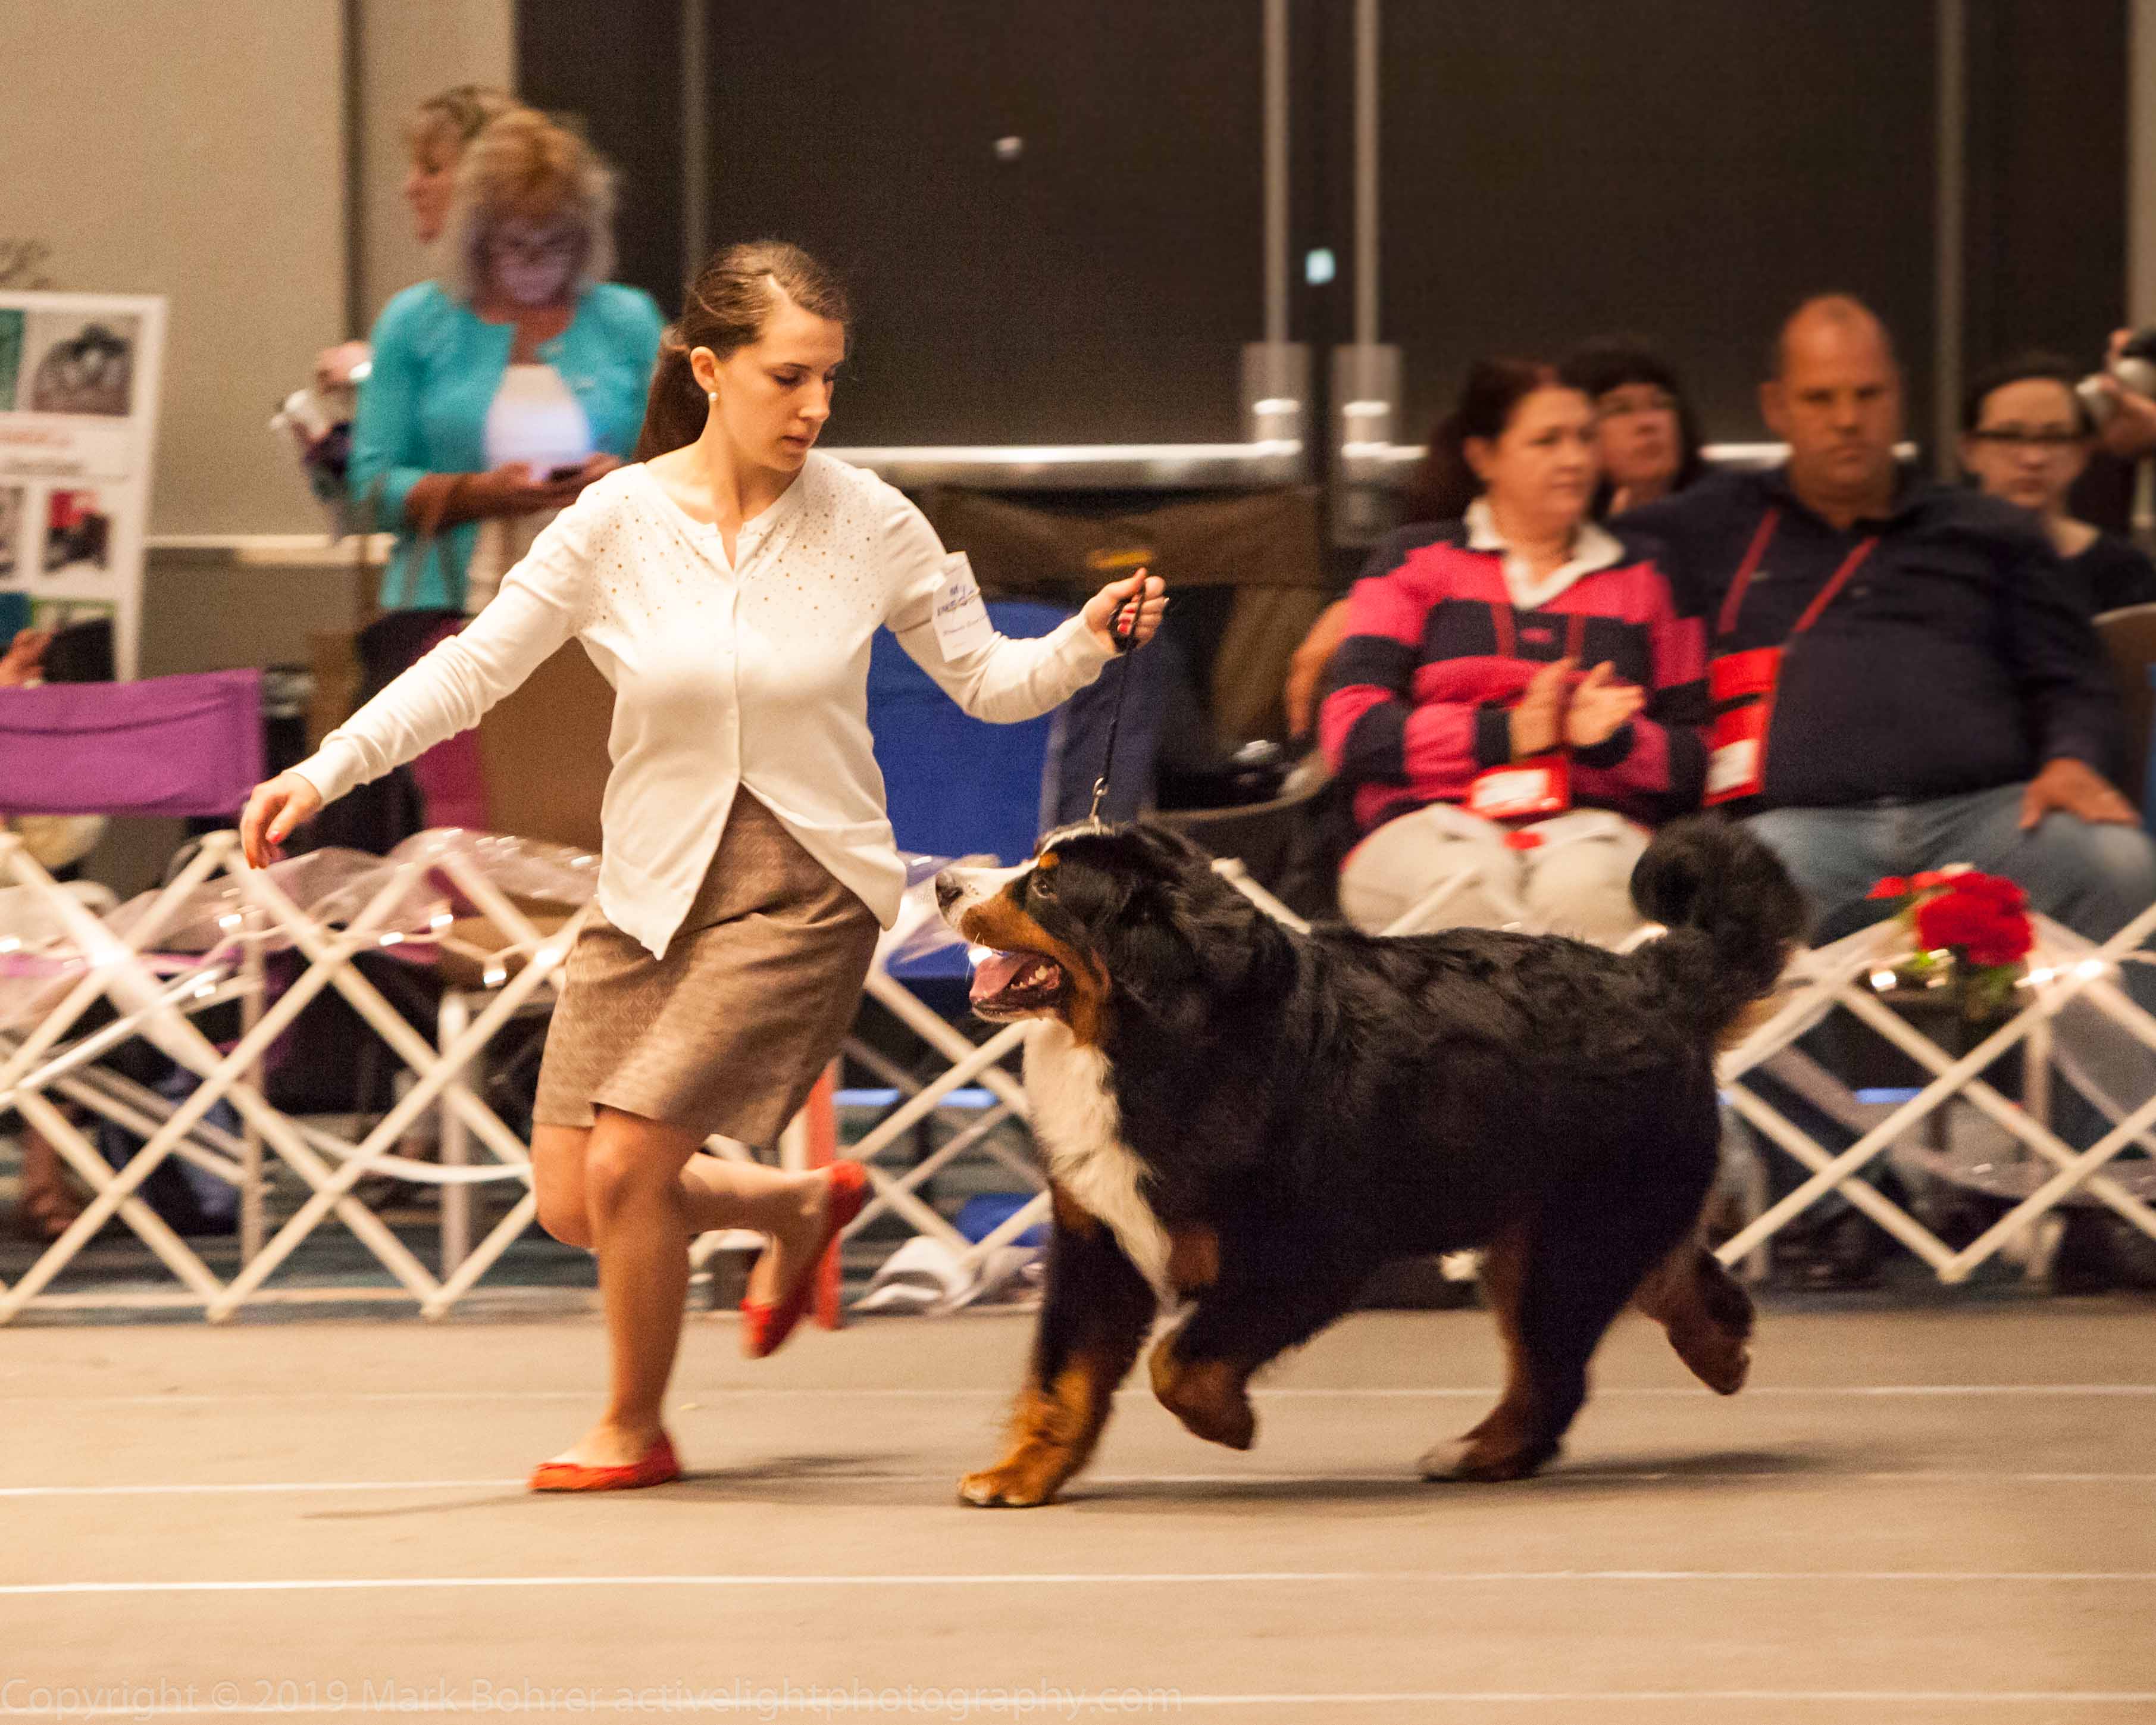 Around the ring at the BMDCA National Specialty